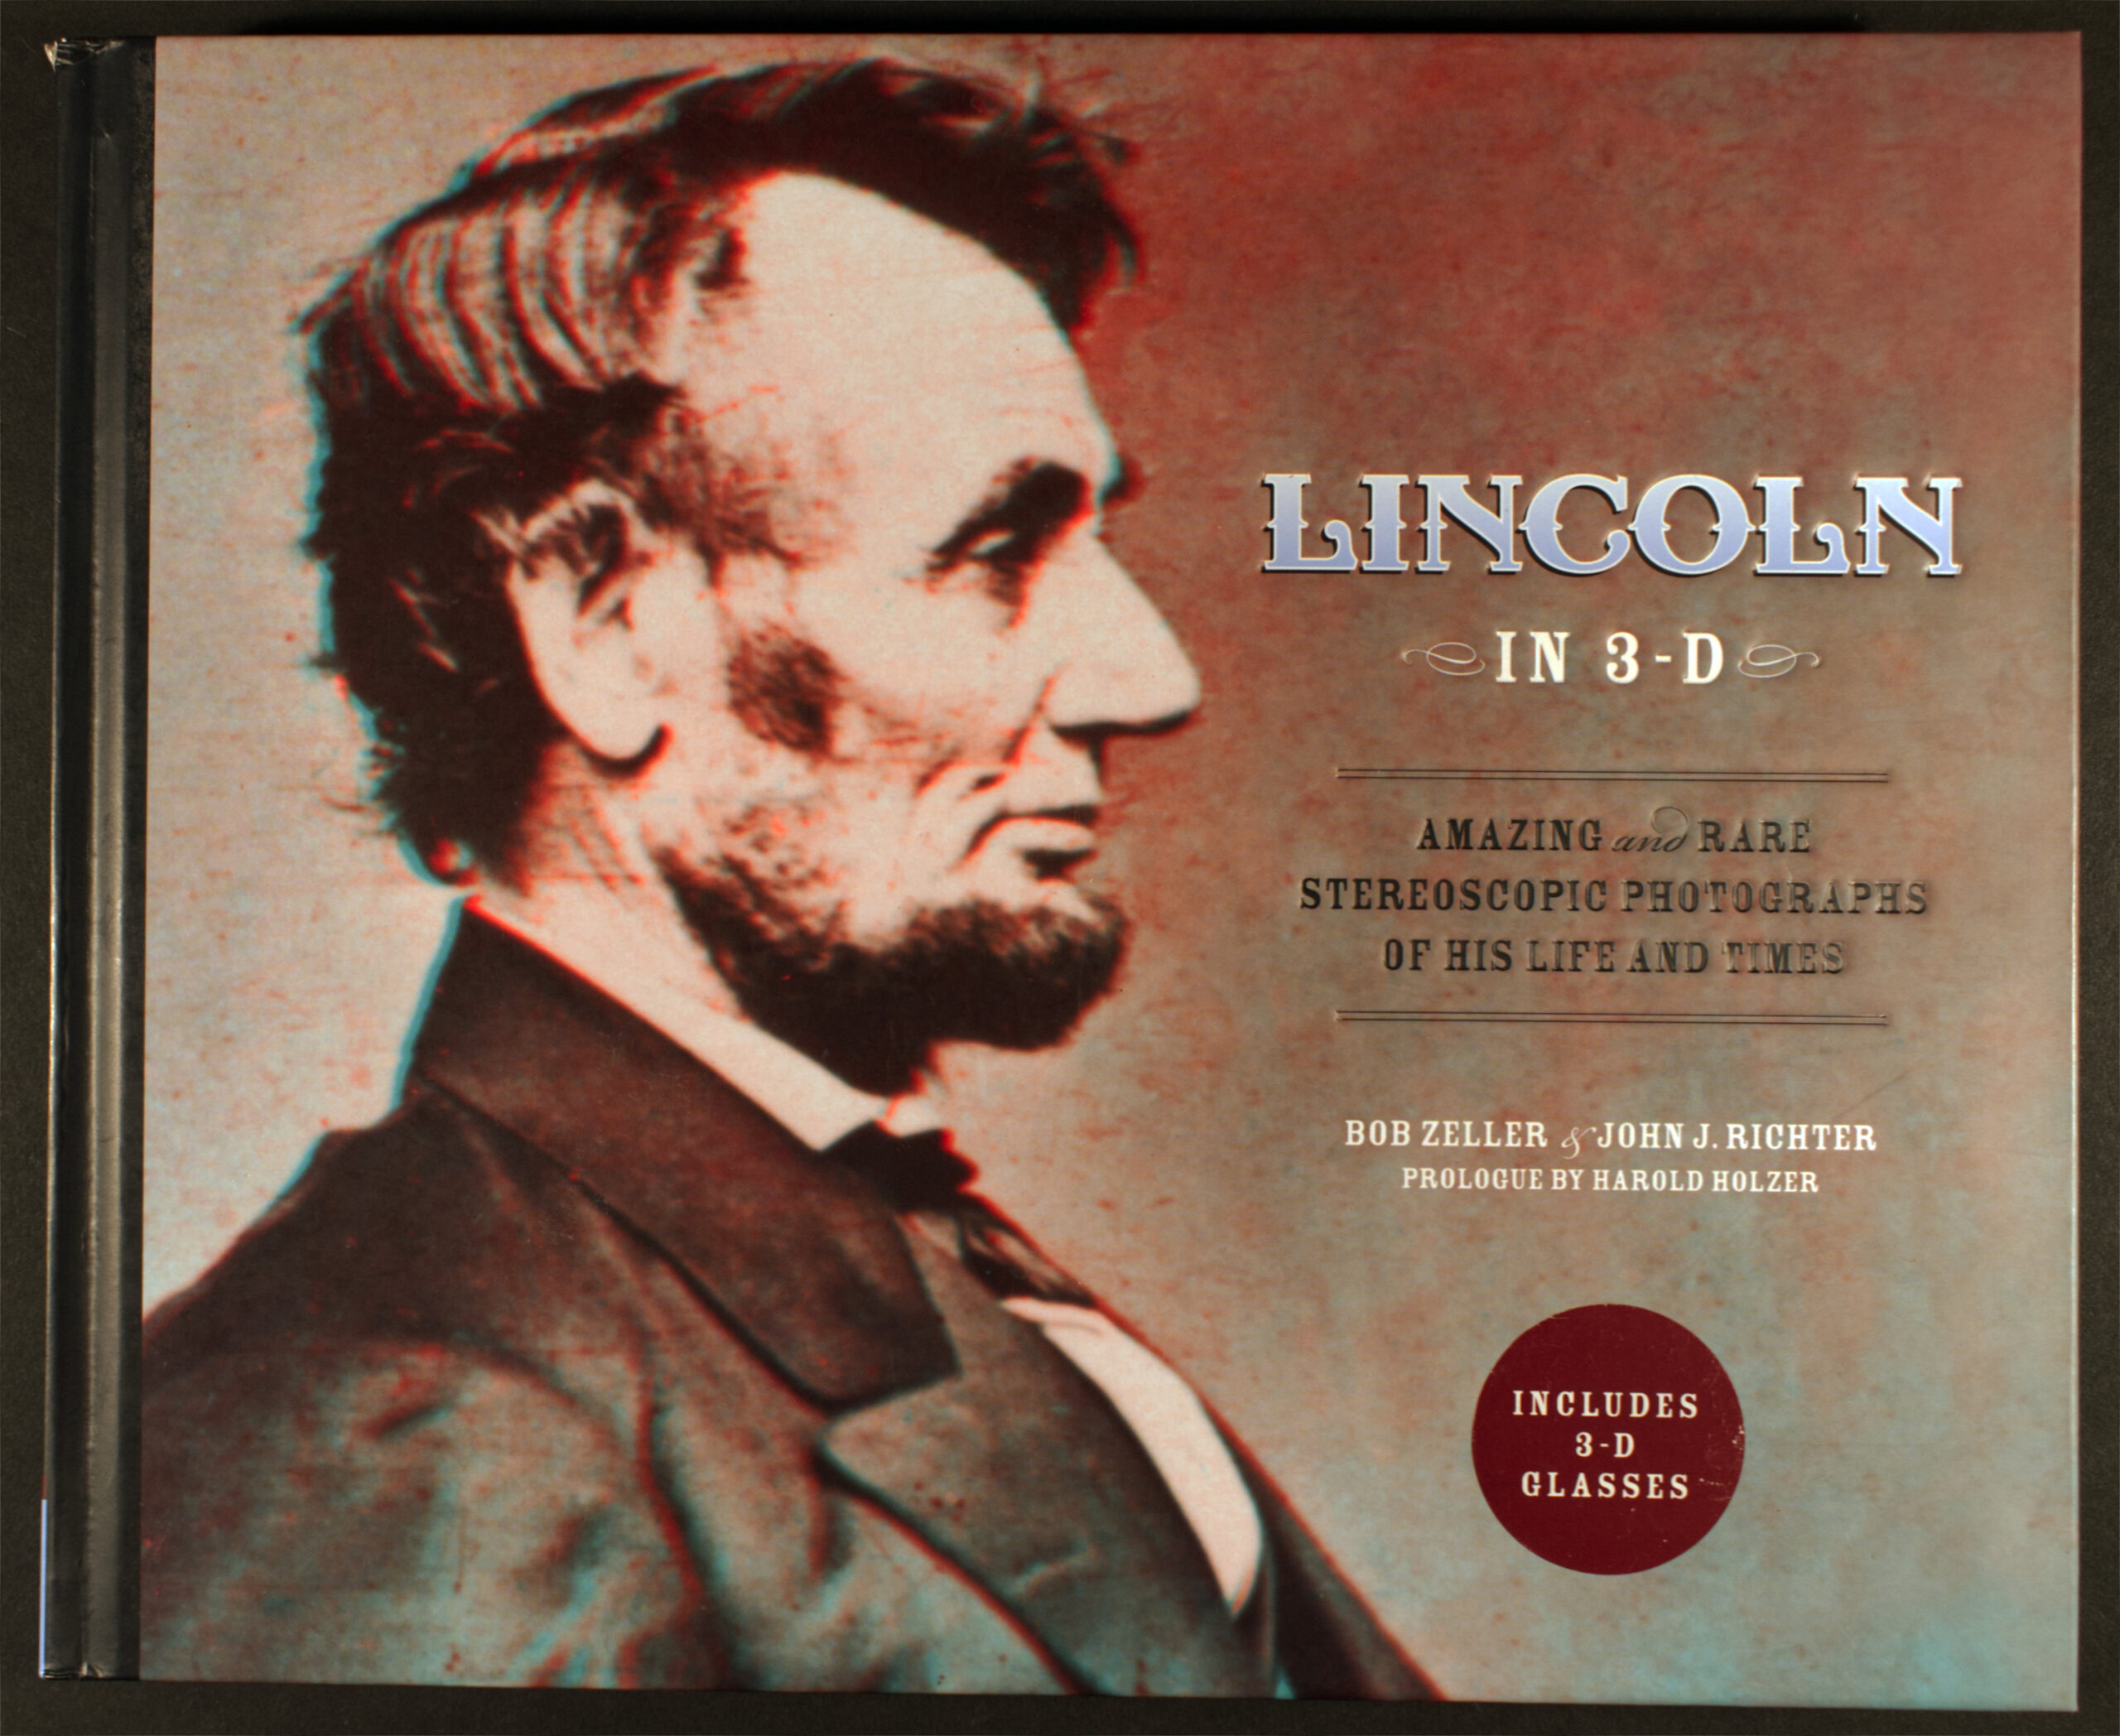 Zeller, Bob, and John J. Richter. Lincoln in 3-D : amazing and rare stereoscopic photographs of his life and times. San Francisco: Chronicle, 2010.